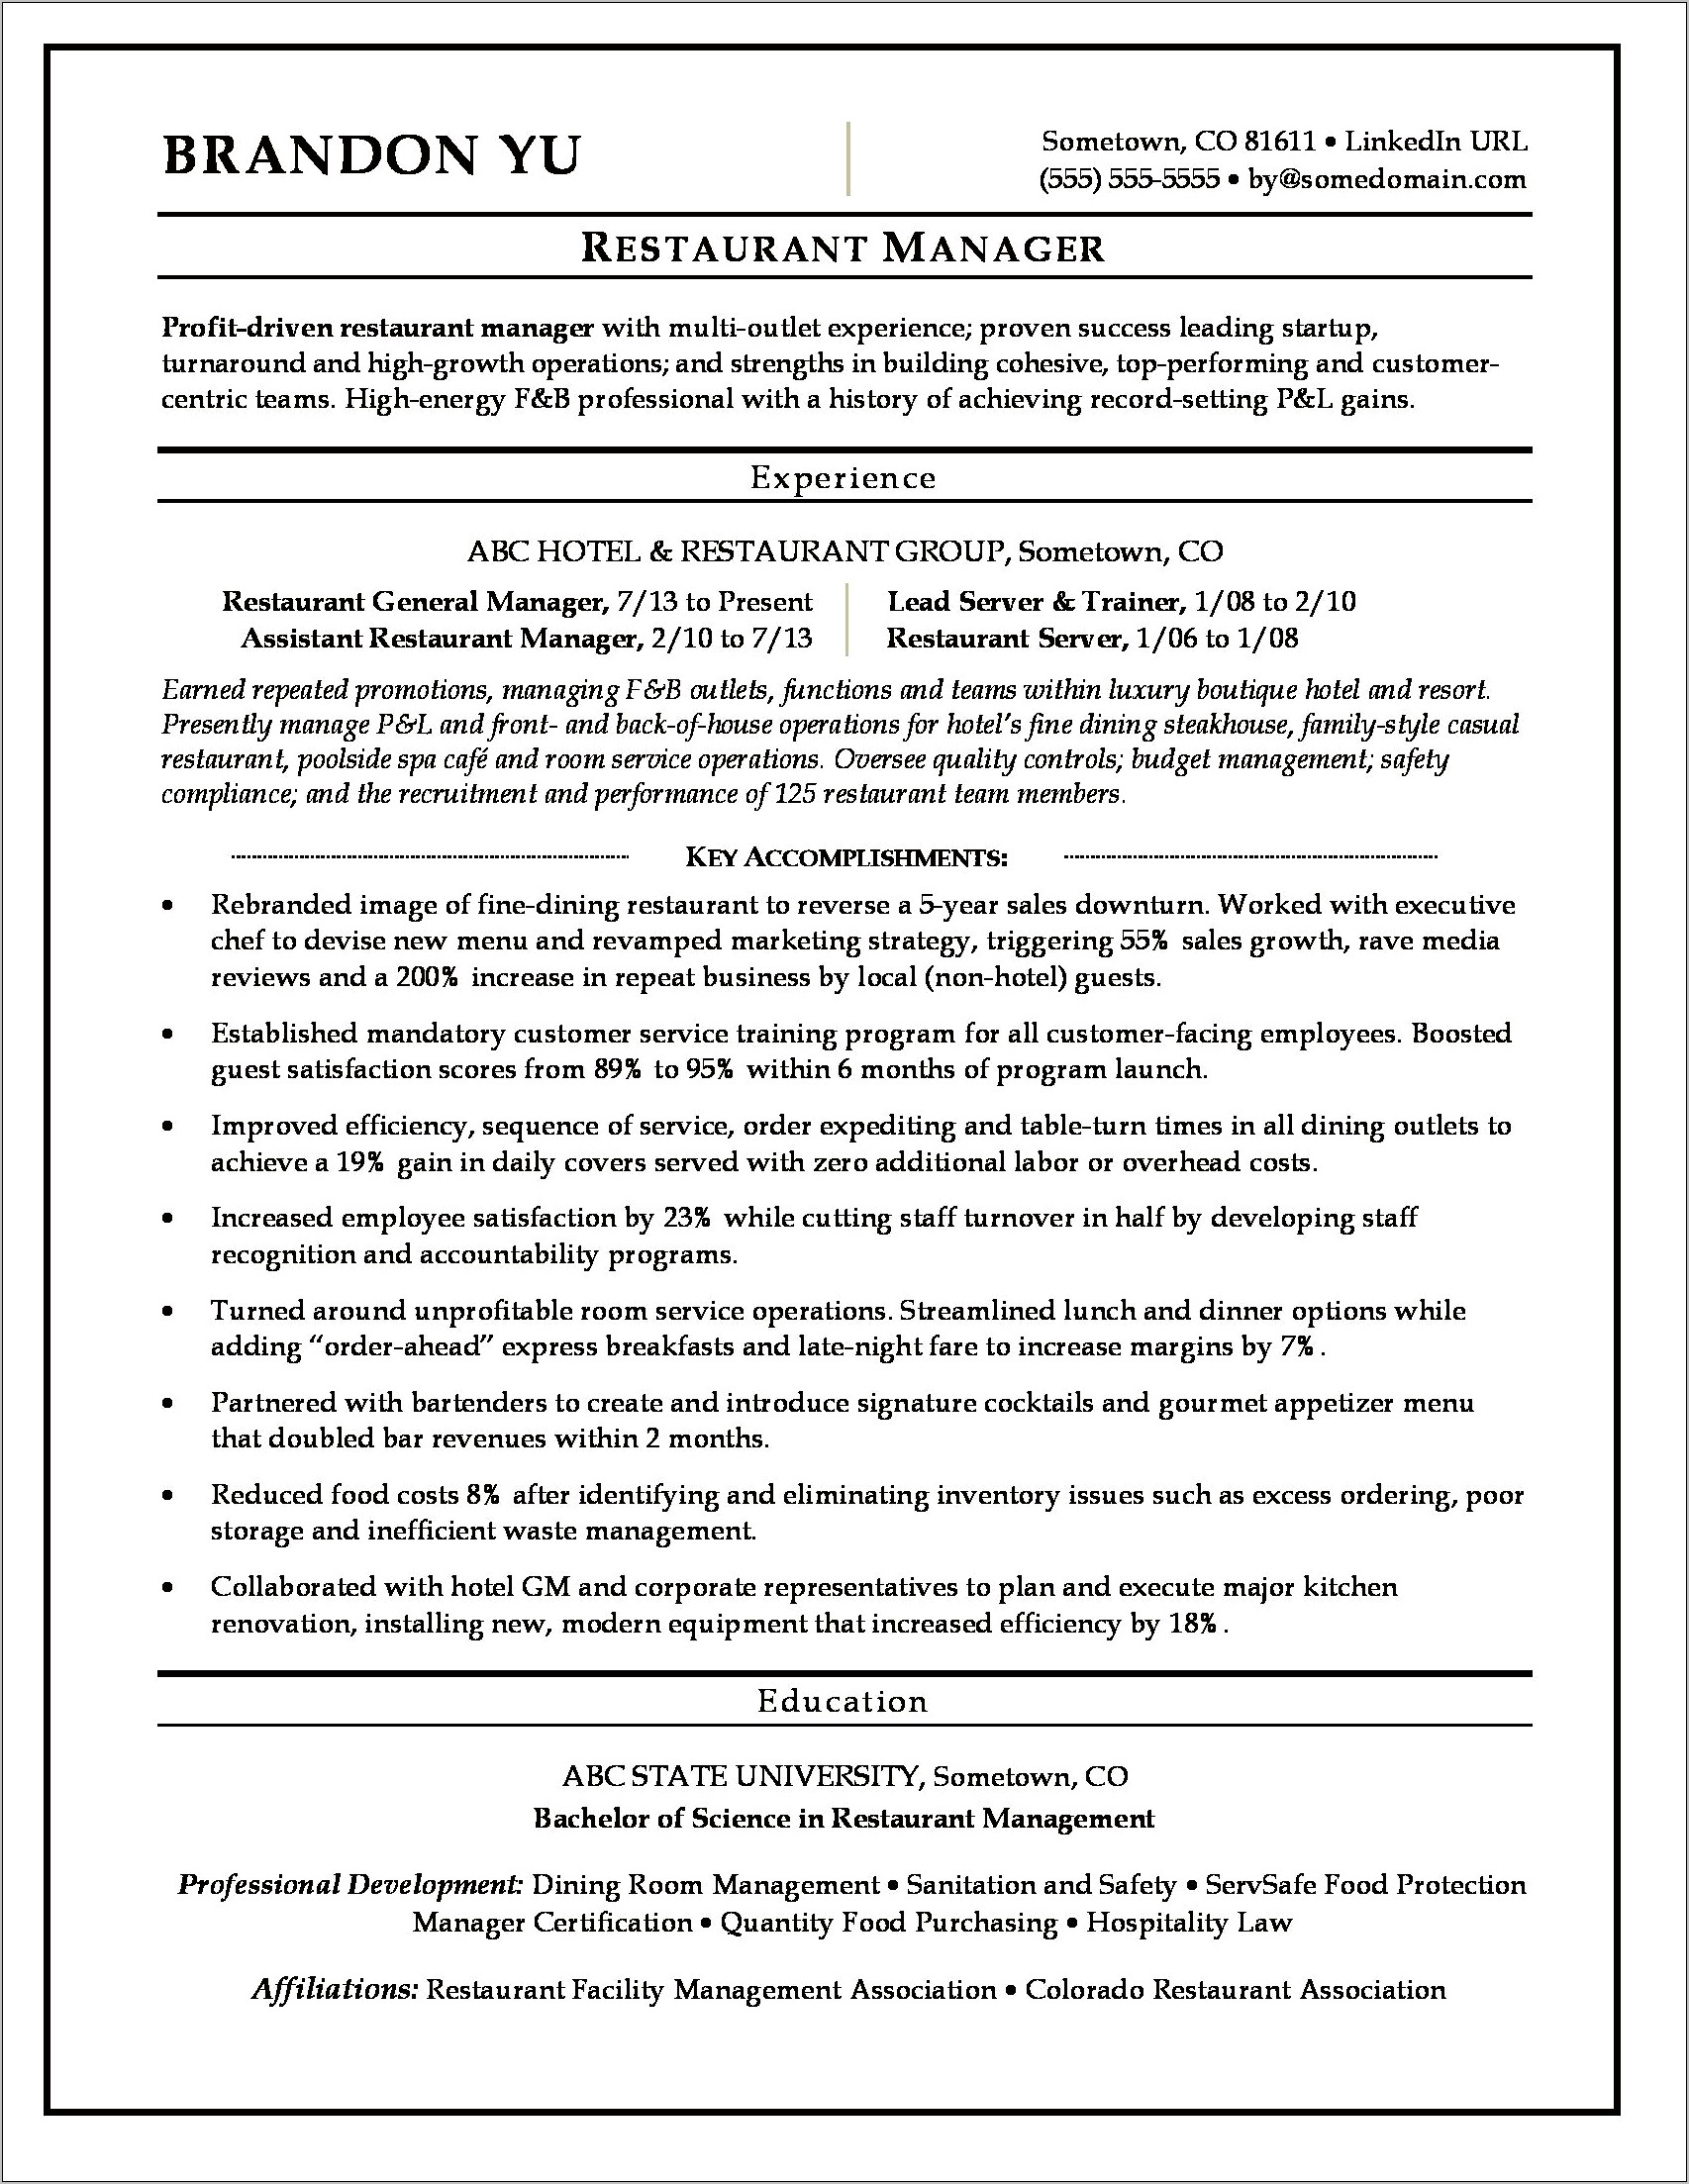 Food And Beverage Manager Resume Template